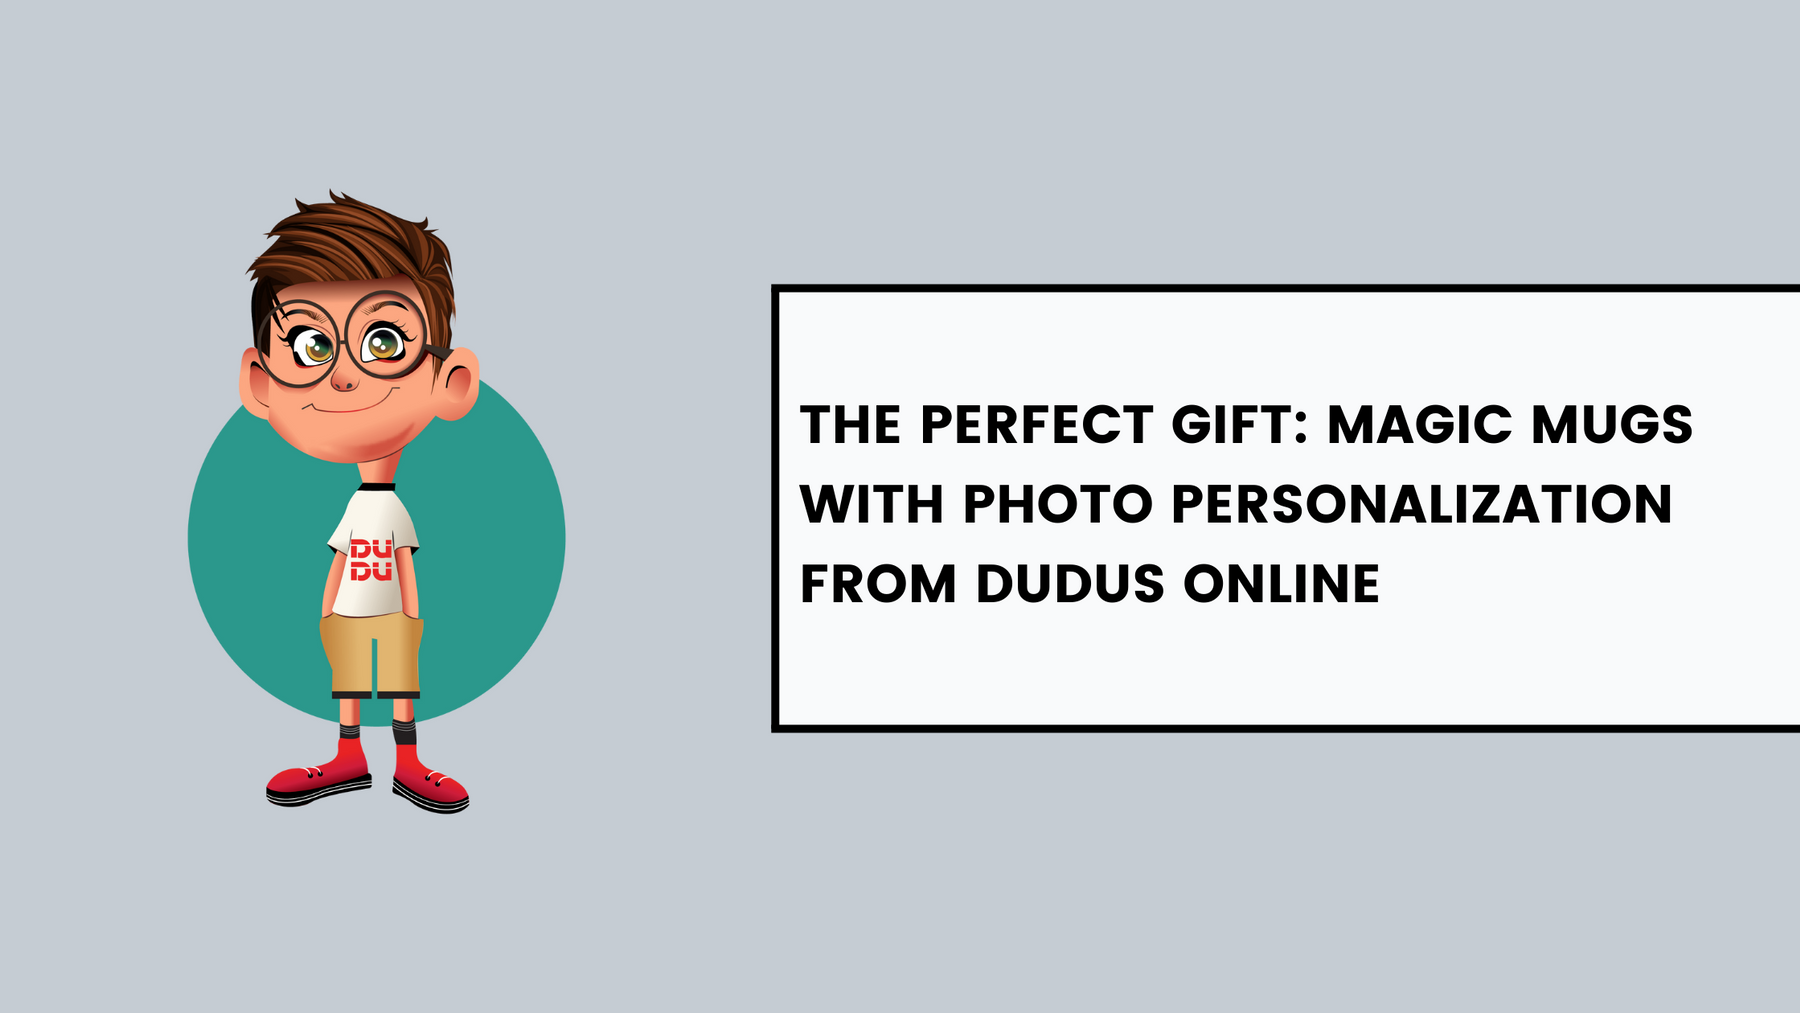 The Perfect Gift: Magic Mugs with Photo Personalization from Dudus Online